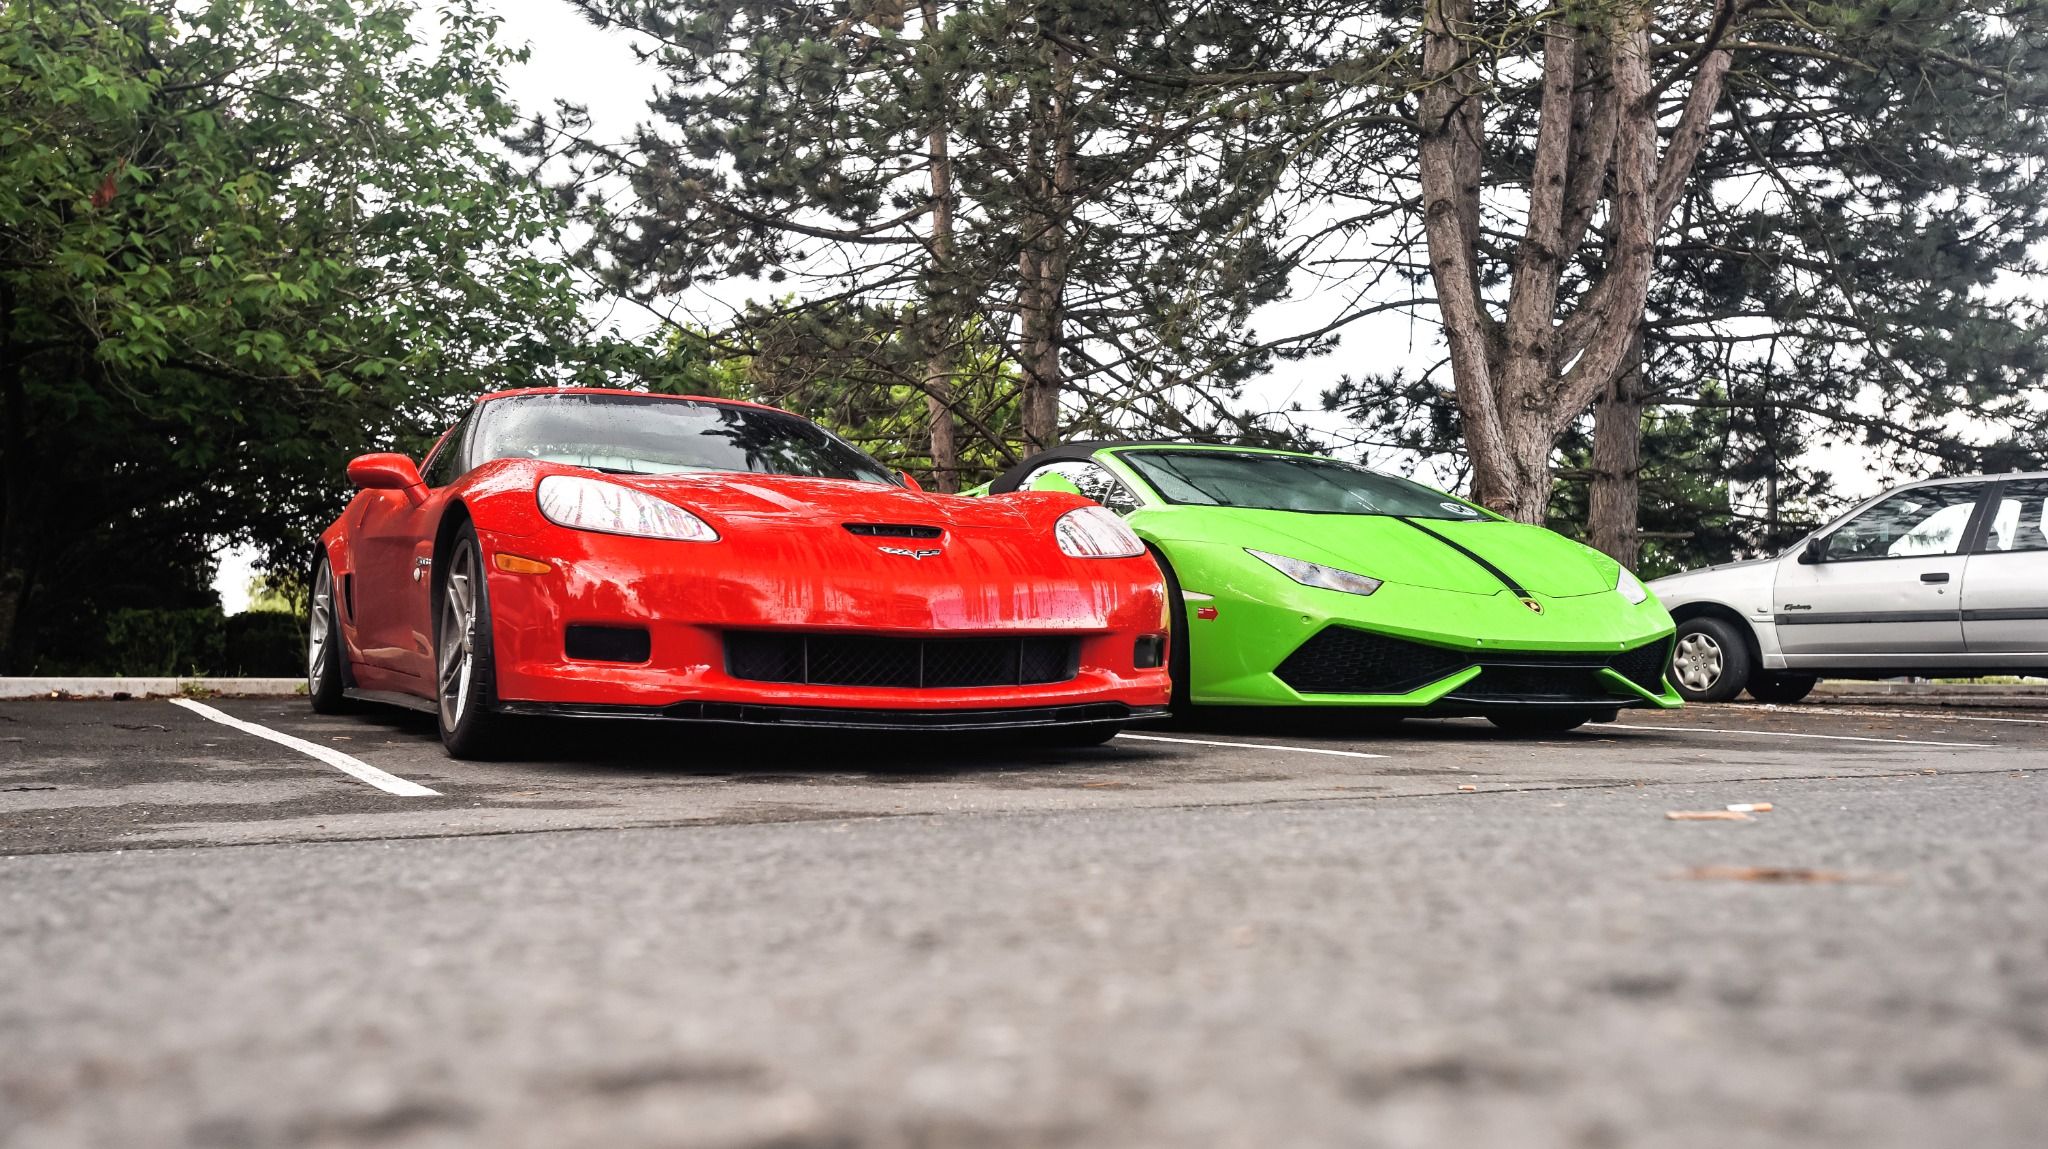 Red and Bright green sport cars parked